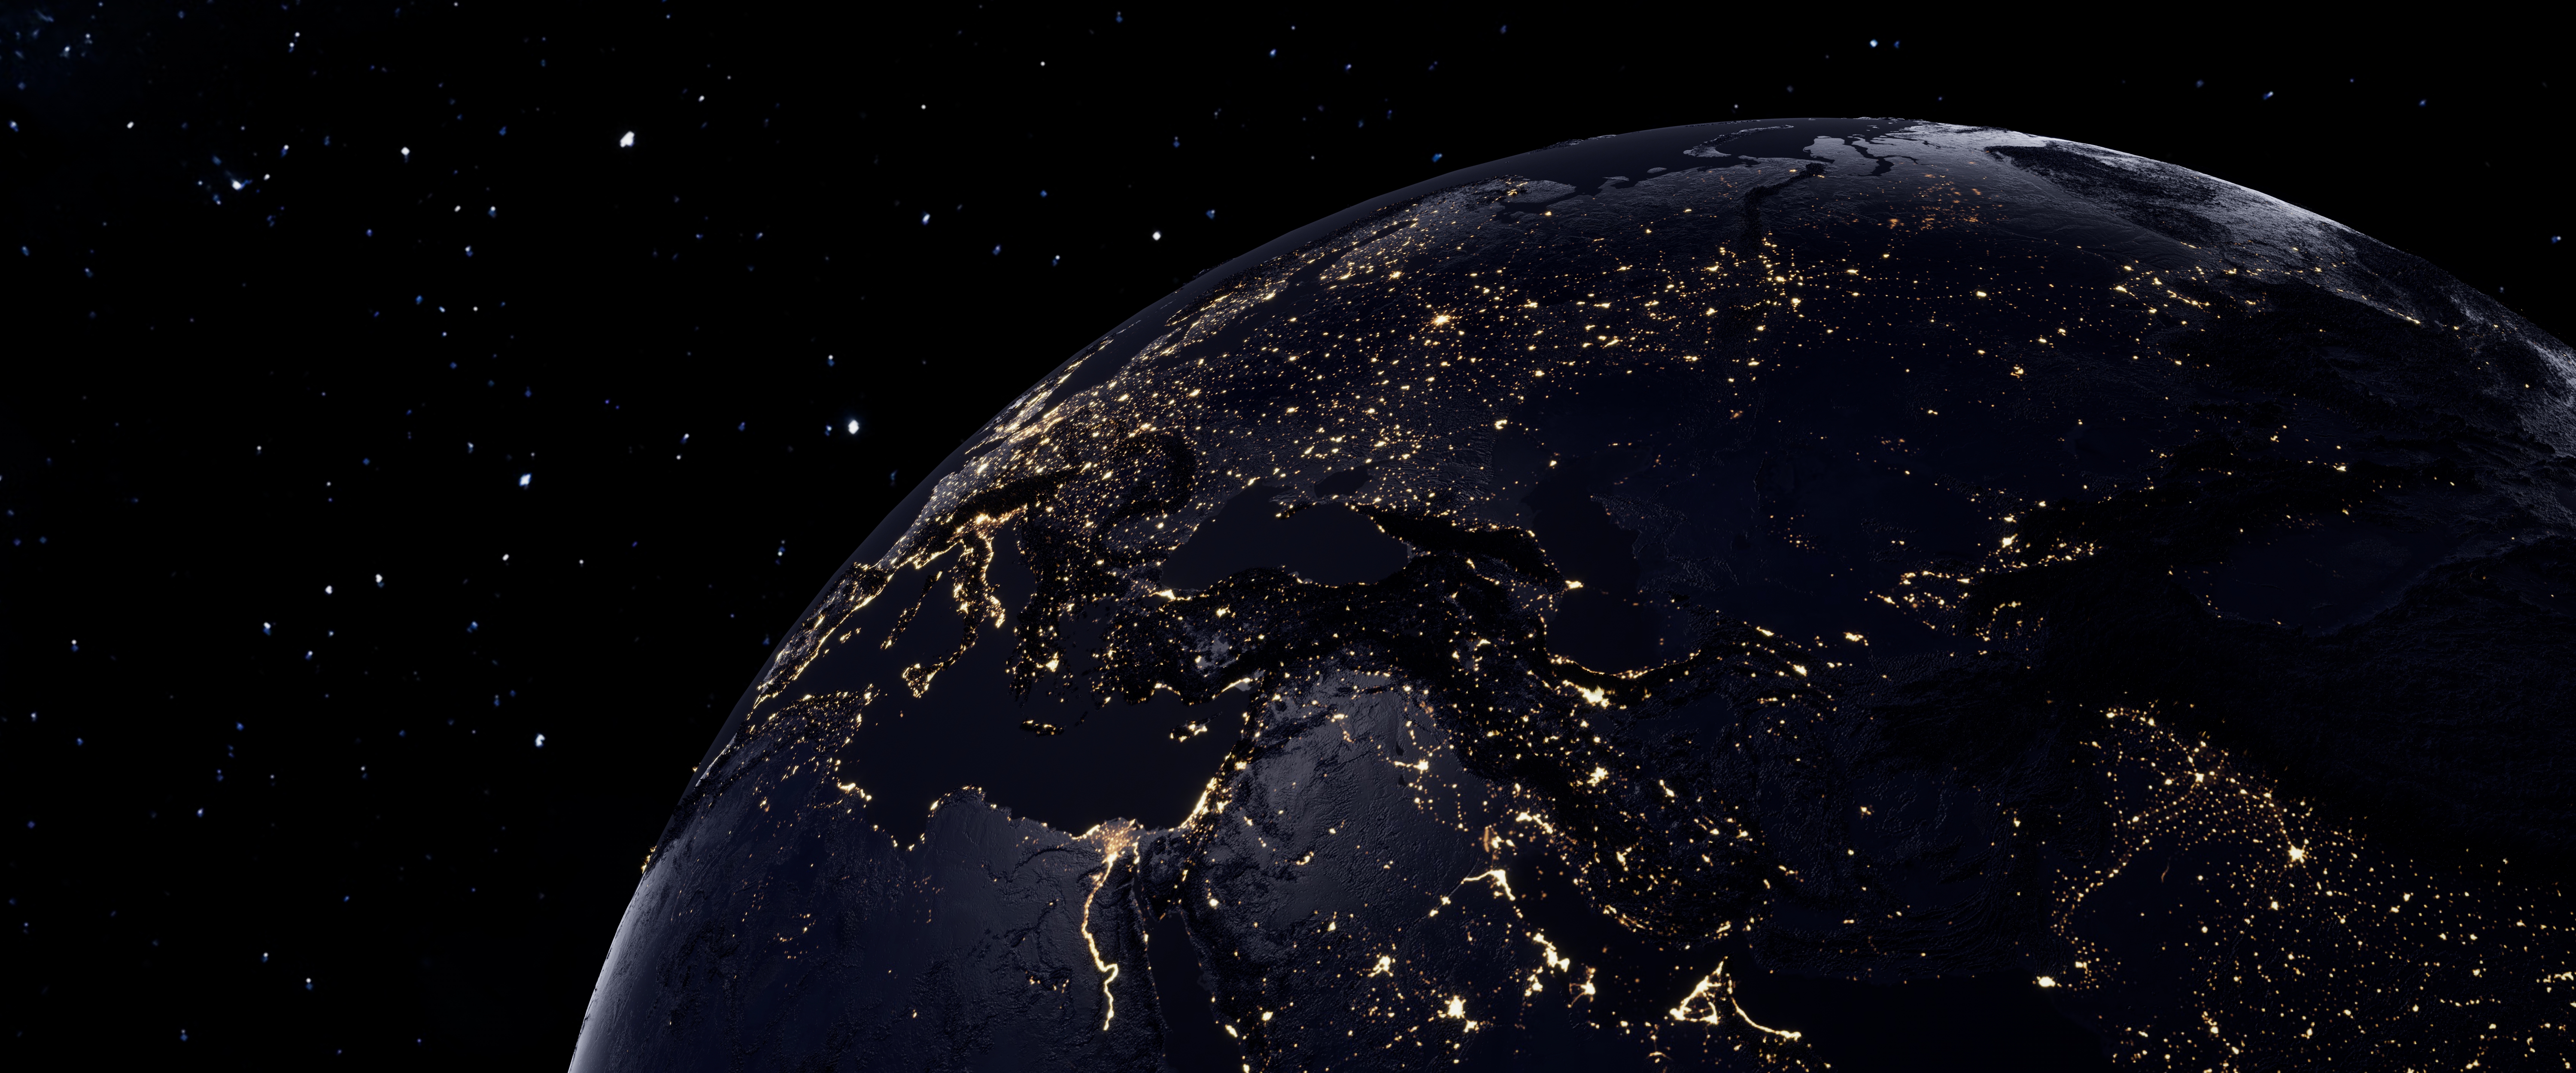 A globe with city lights glowing in the dark - Earth